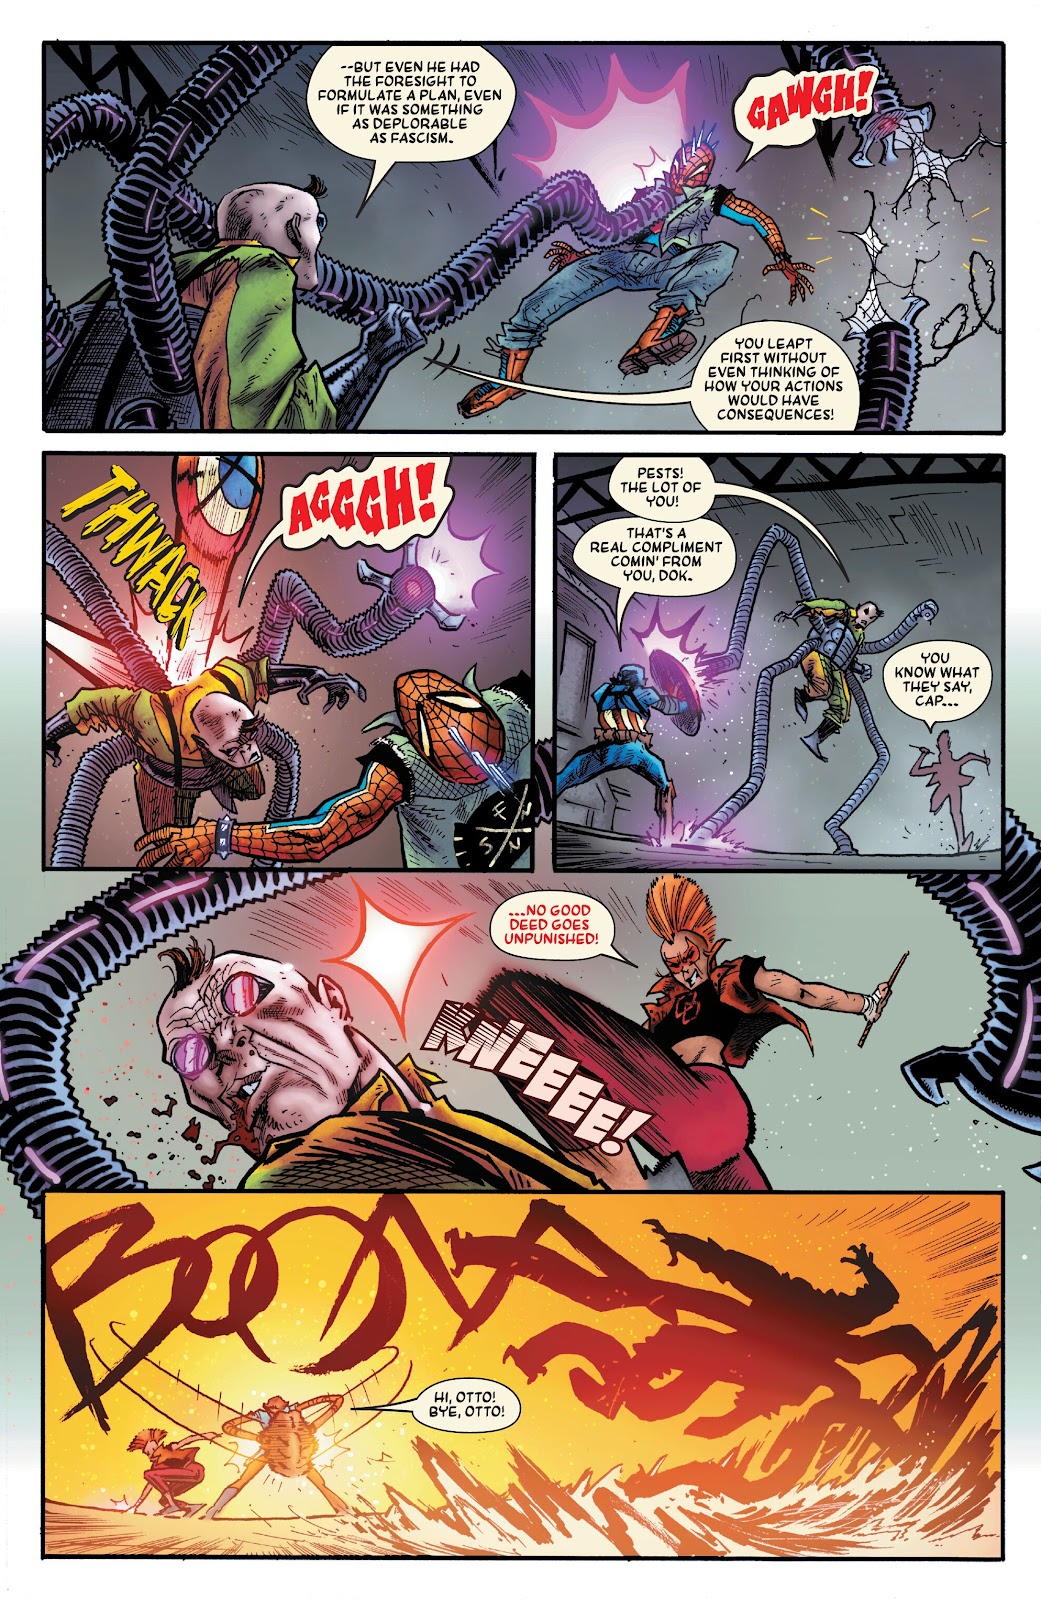 Spider-Punk: Arms Race issue 3 - Page 5